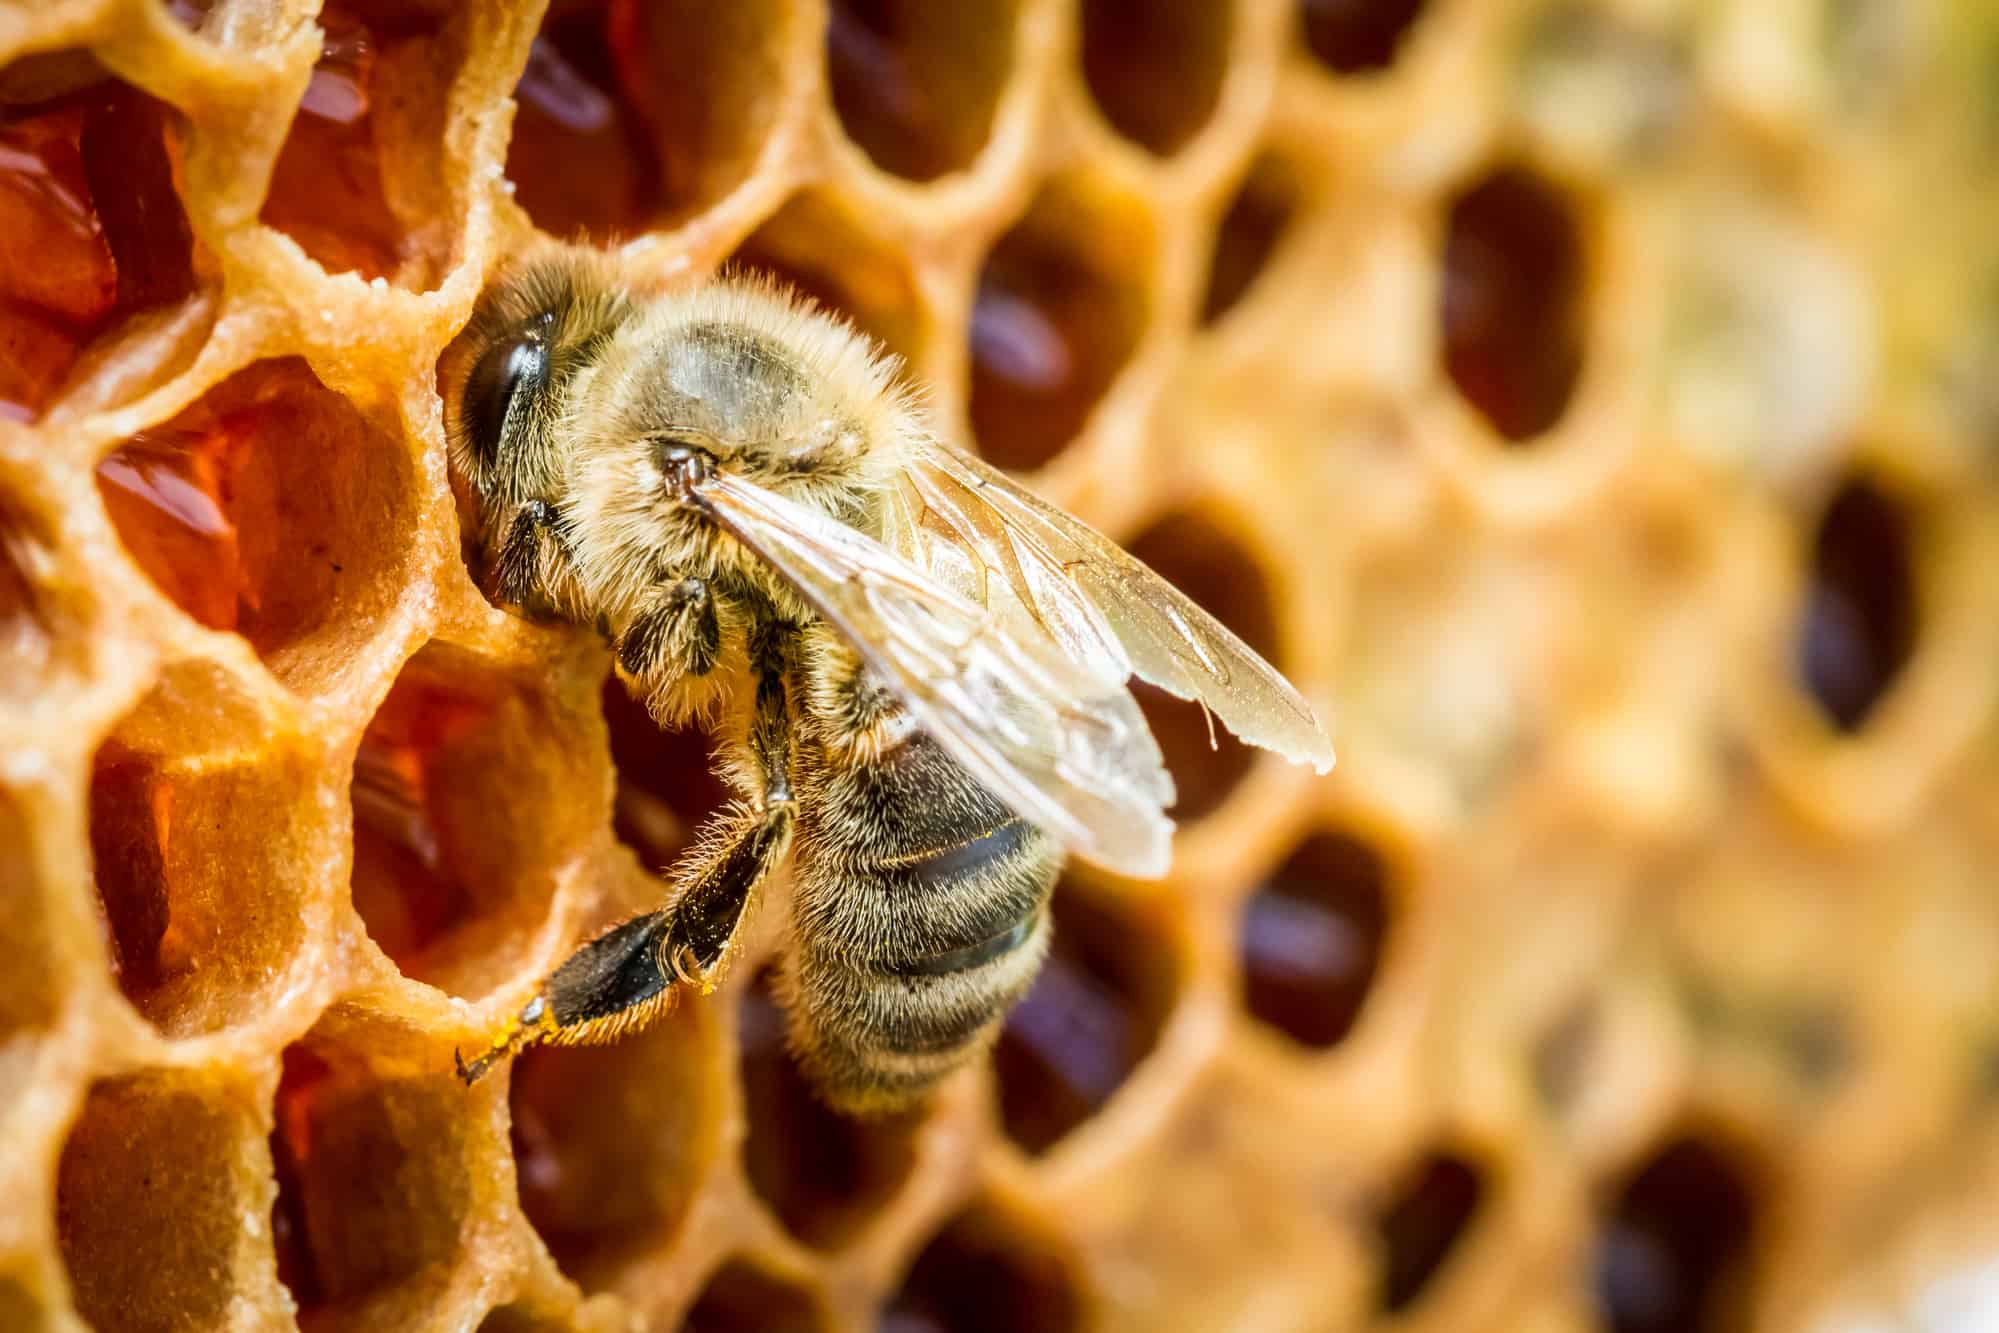 A Close up of bees in a beehive on honeycomb